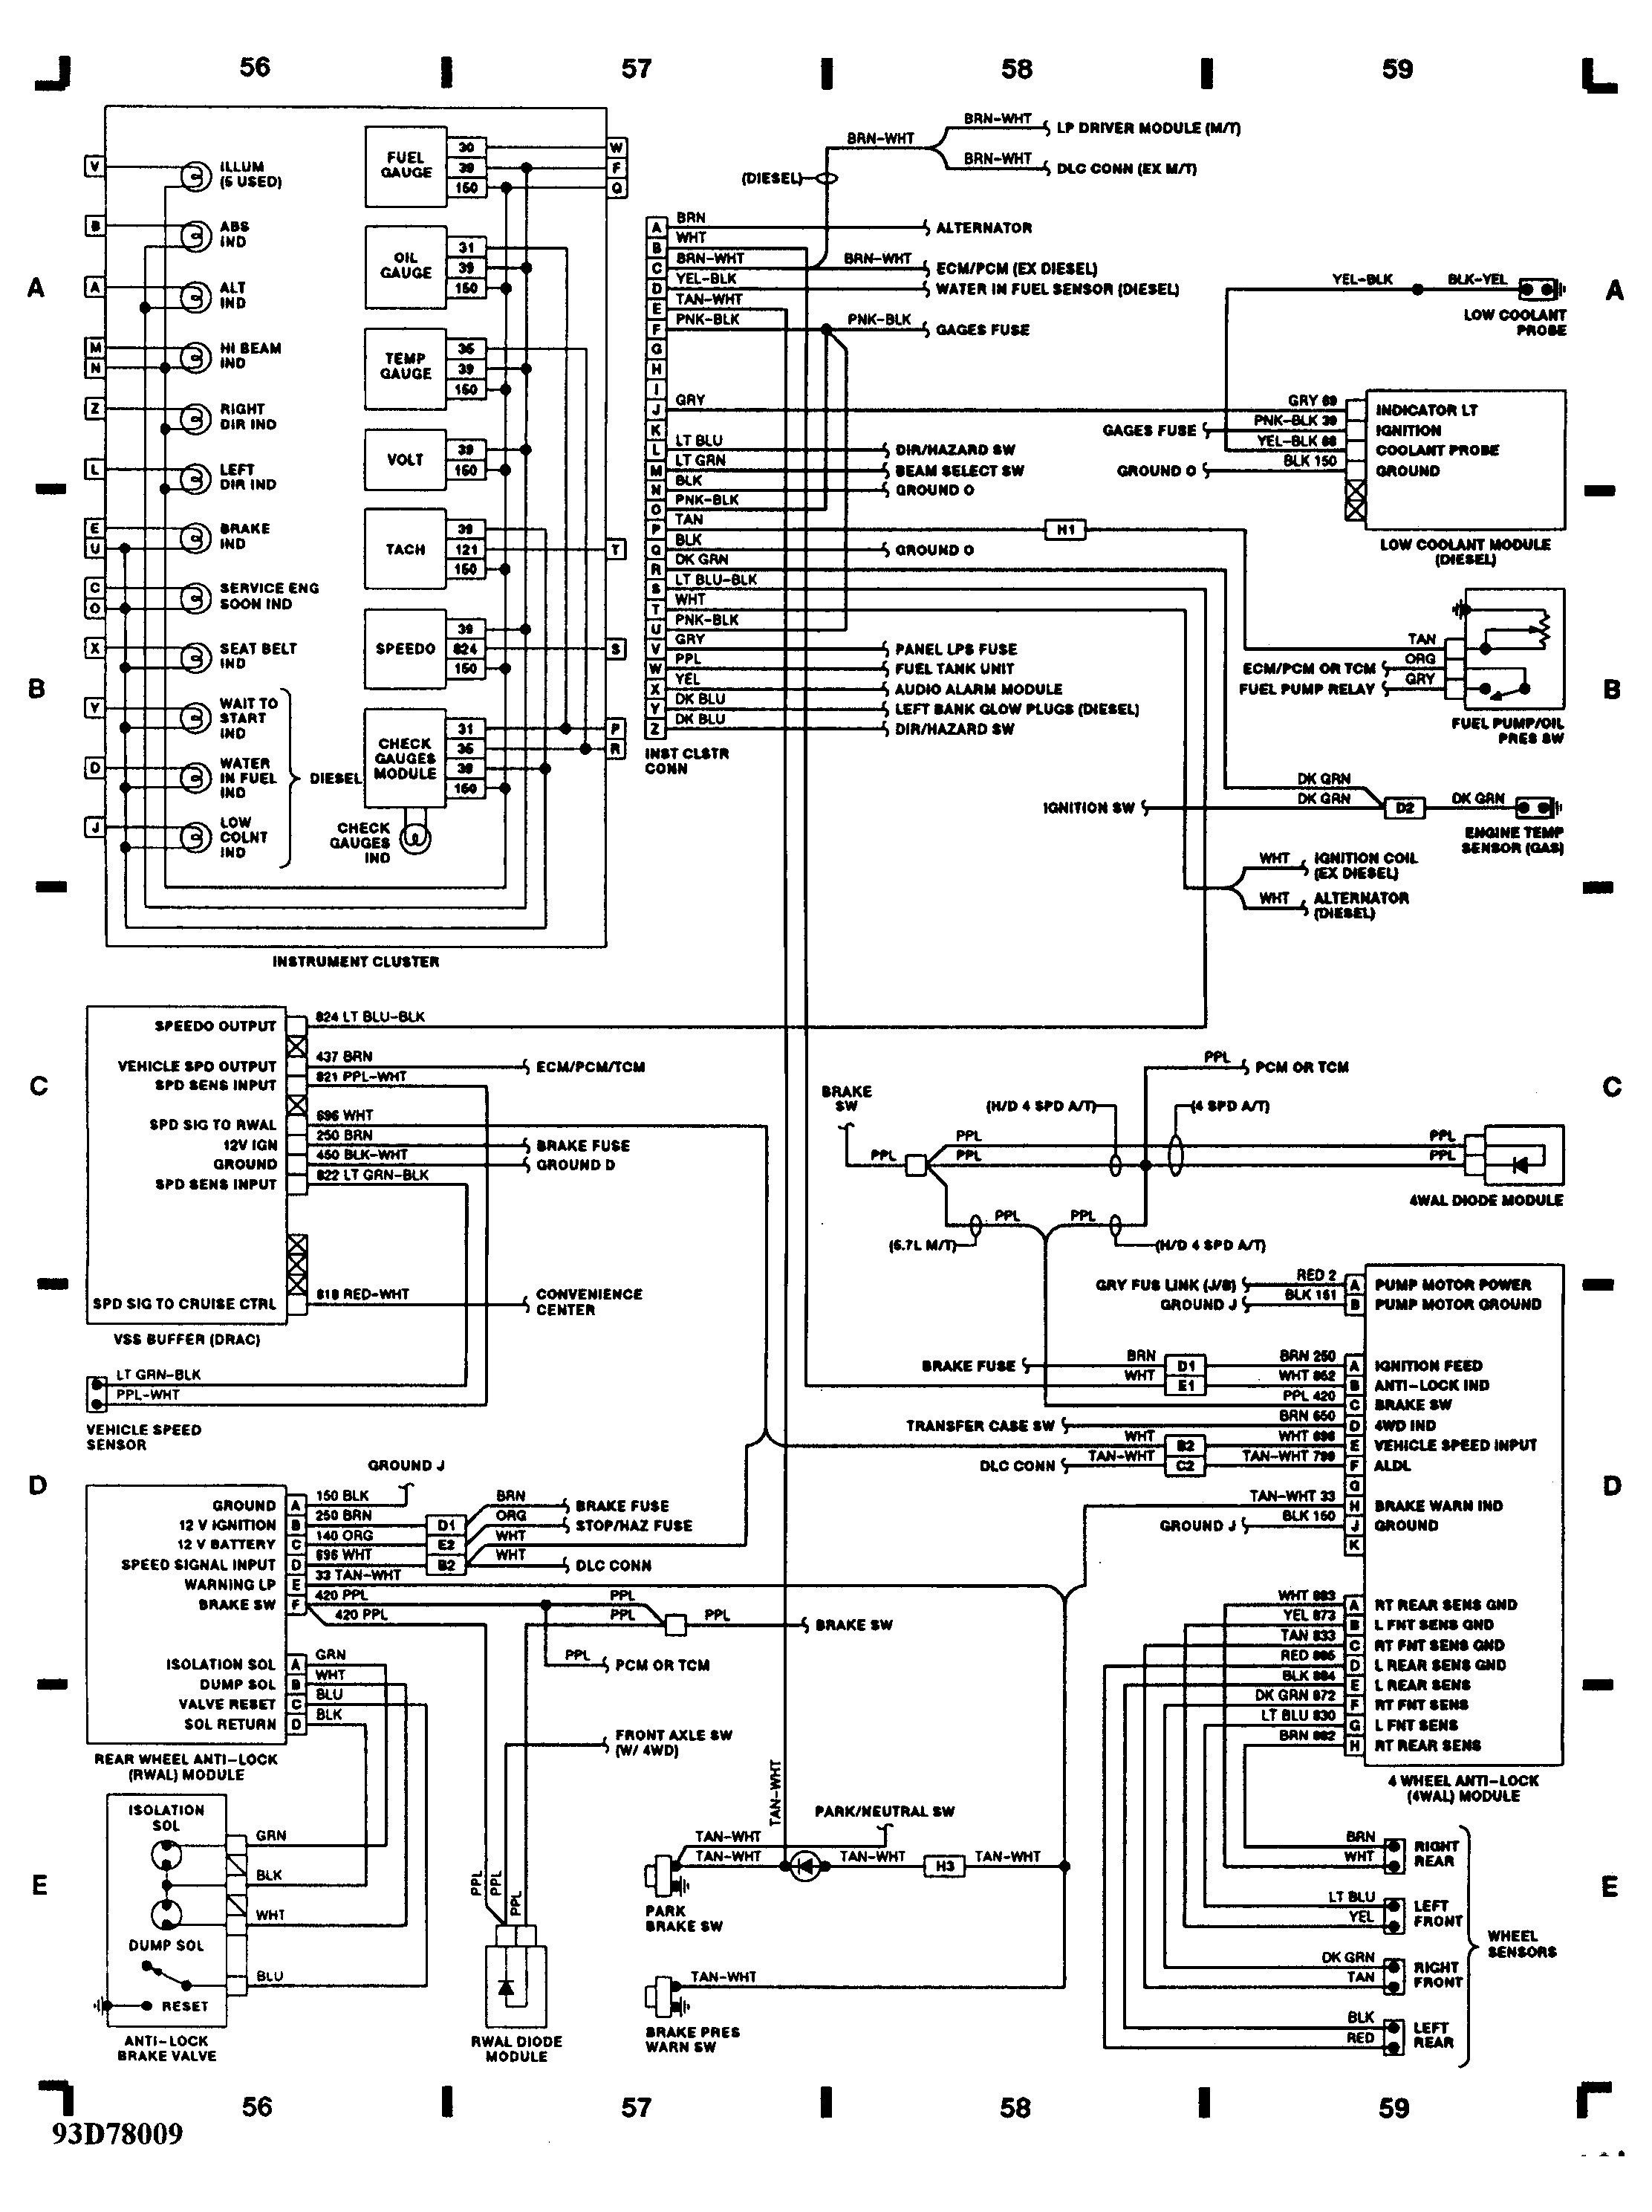 2002 Lincoln Ls Engine Diagram 2002 Ls1 Engine Diagram Another Blog About Wiring Diagram • Of 2002 Lincoln Ls Engine Diagram